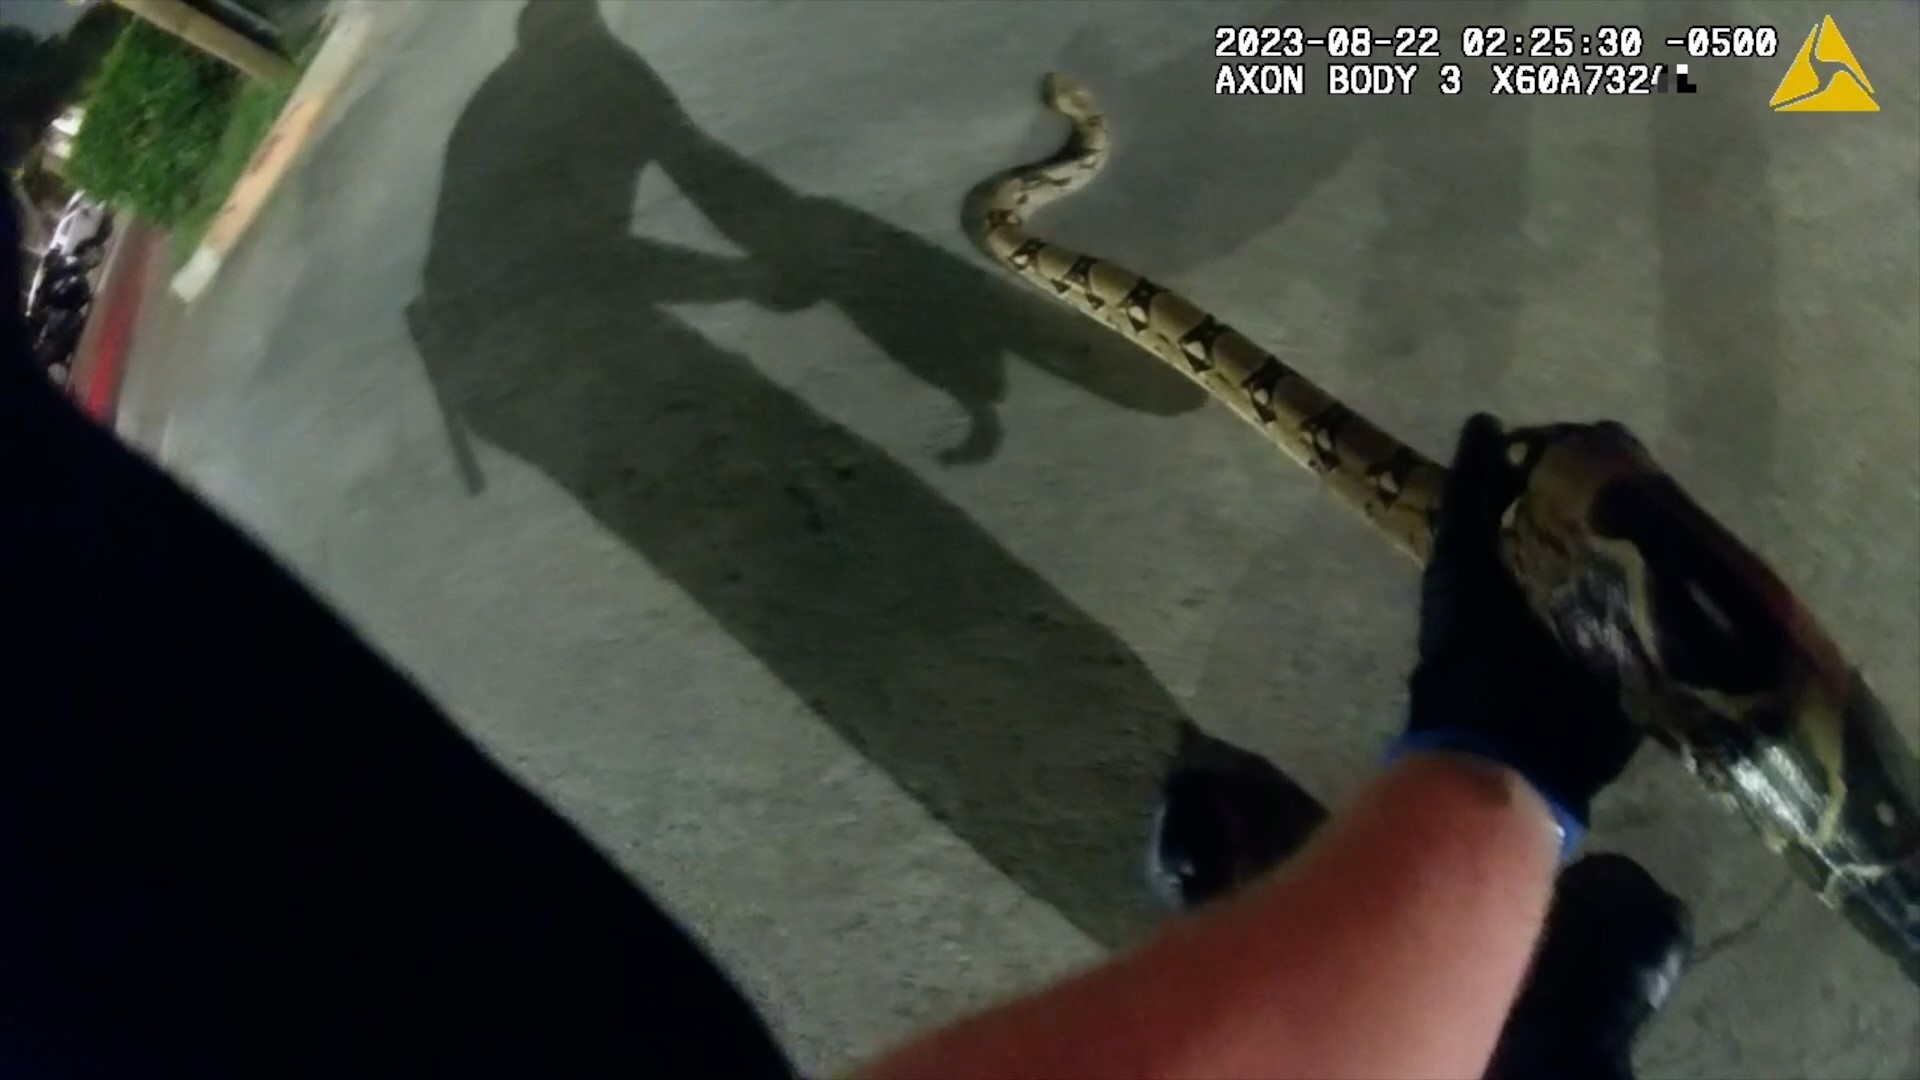 On Tuesday, the Irving Police Department received a call that a snake was loose in a parking lot.